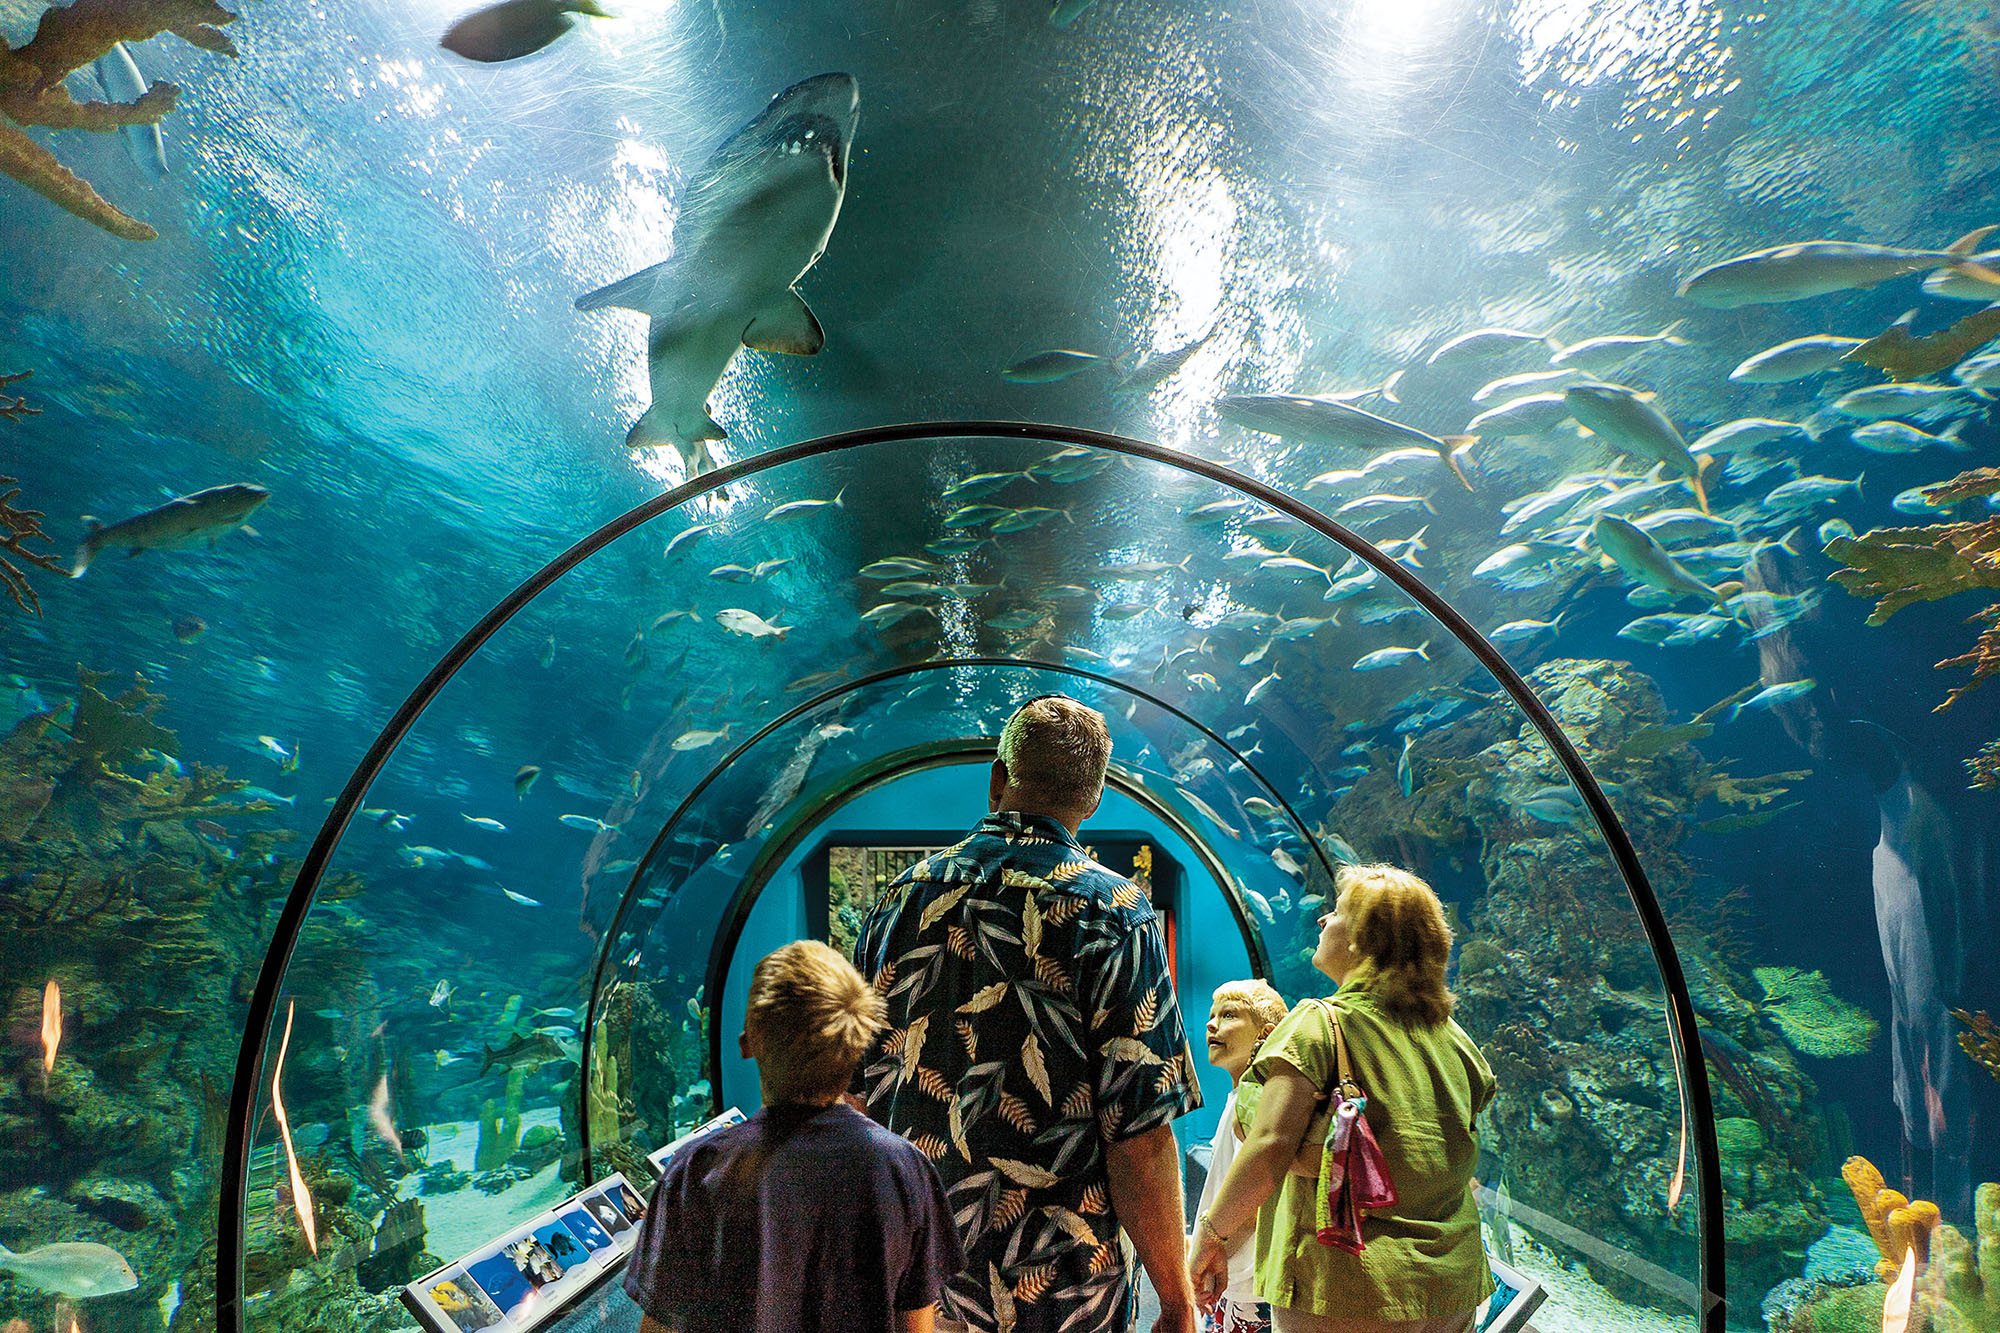 A group of people walk through a glass-ceilinged tunnel with fish swimming in blue water